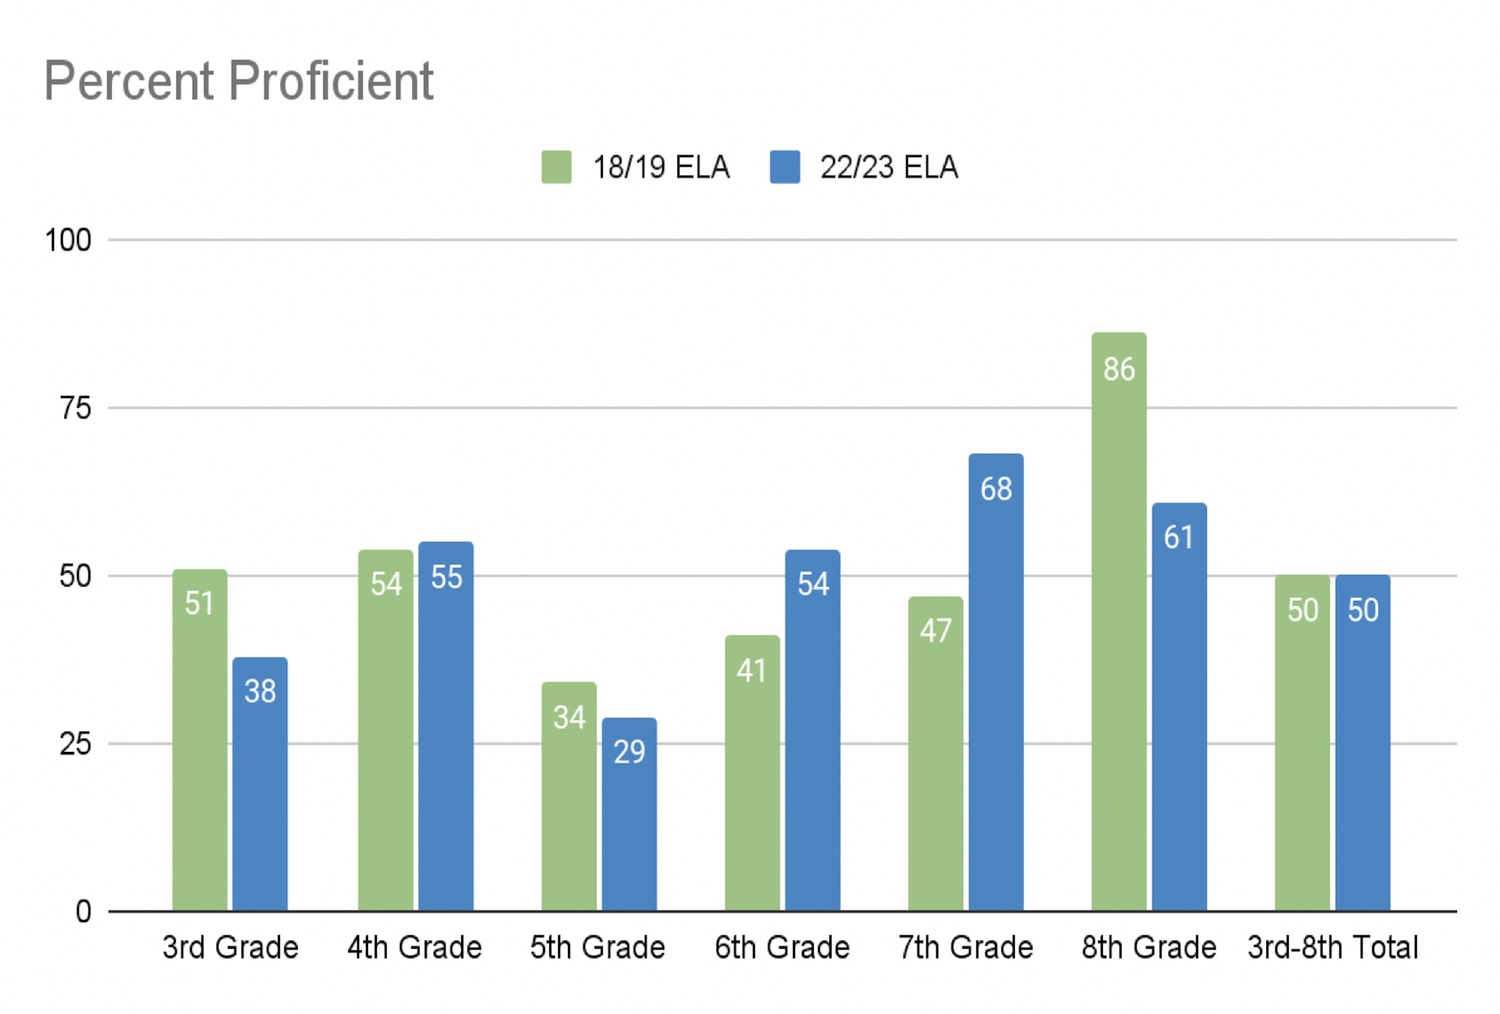 Comparing English language arts proficiency at Springs School in the 2018-19 school year to the 2022-23 school year. SPRINGS SCHOOL